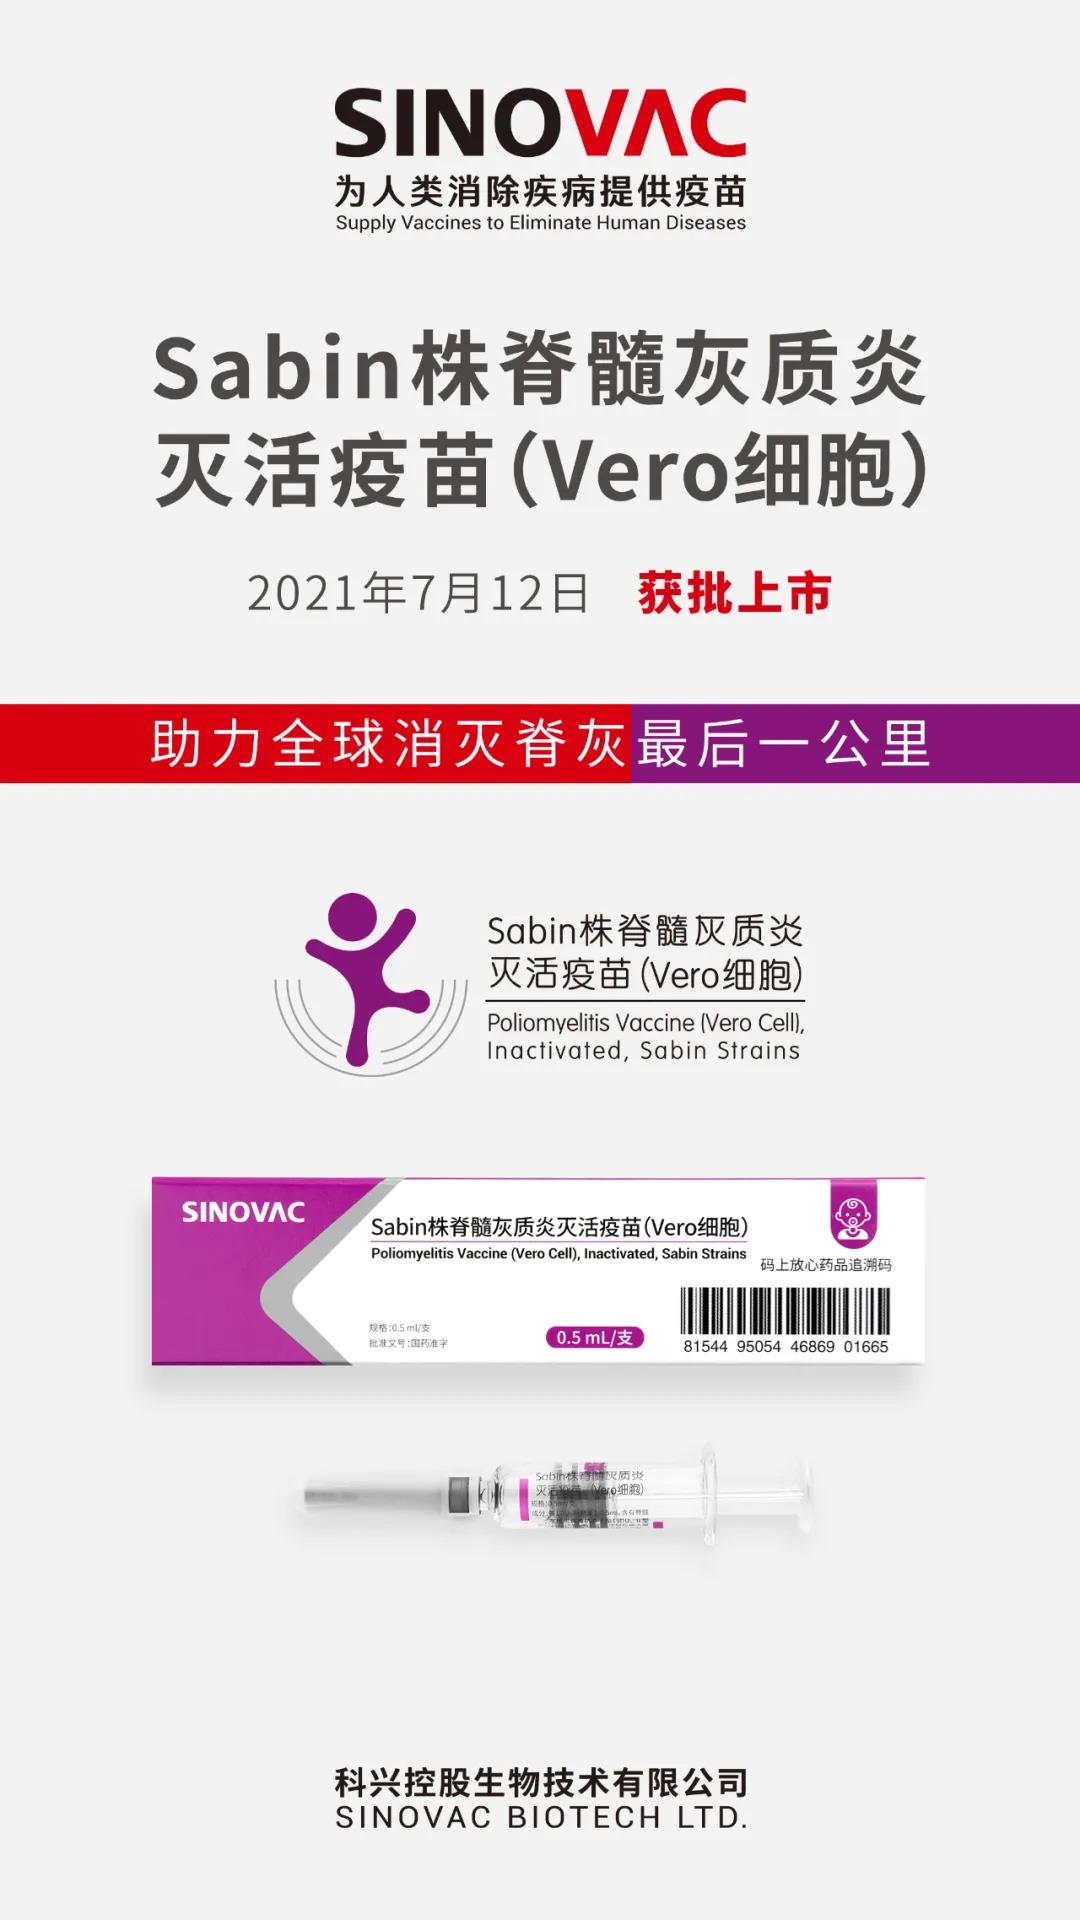 SINOVAC Sabin strain inactivated polio vaccine was approved by China